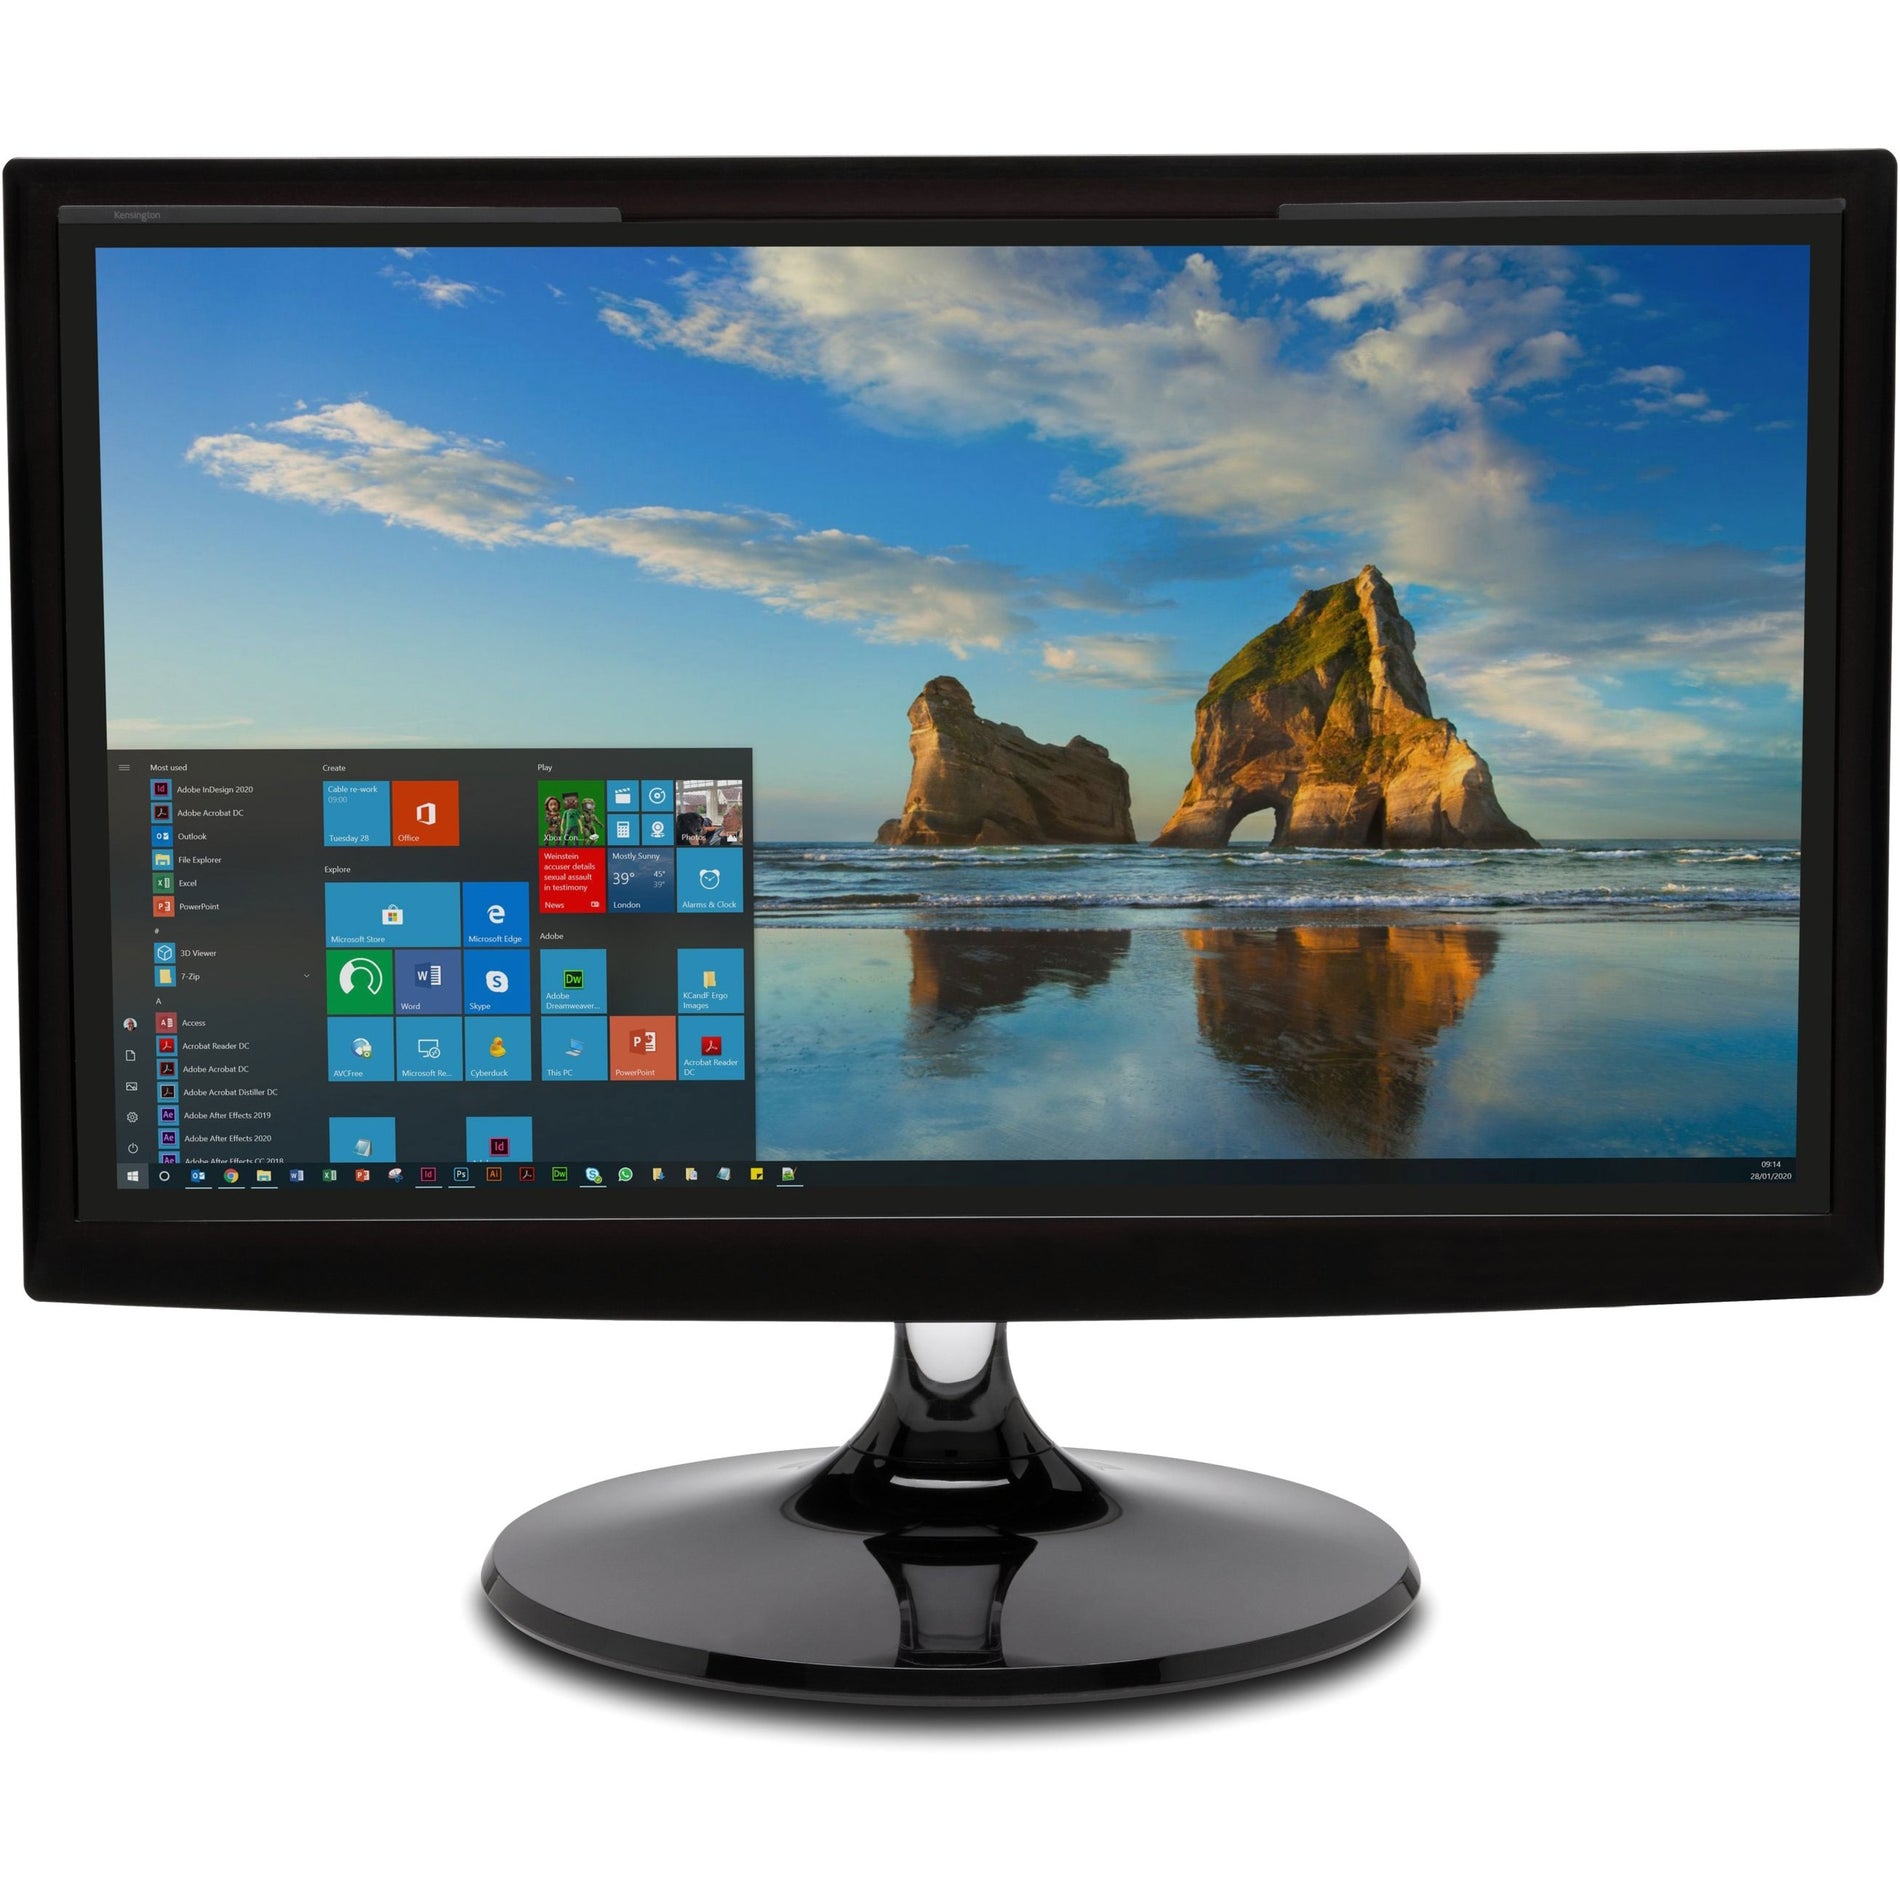 Kensington K58356WW MagPro 23.8" Monitor Privacy Screen with Magnetic Strip, 16:9 Aspect Ratio